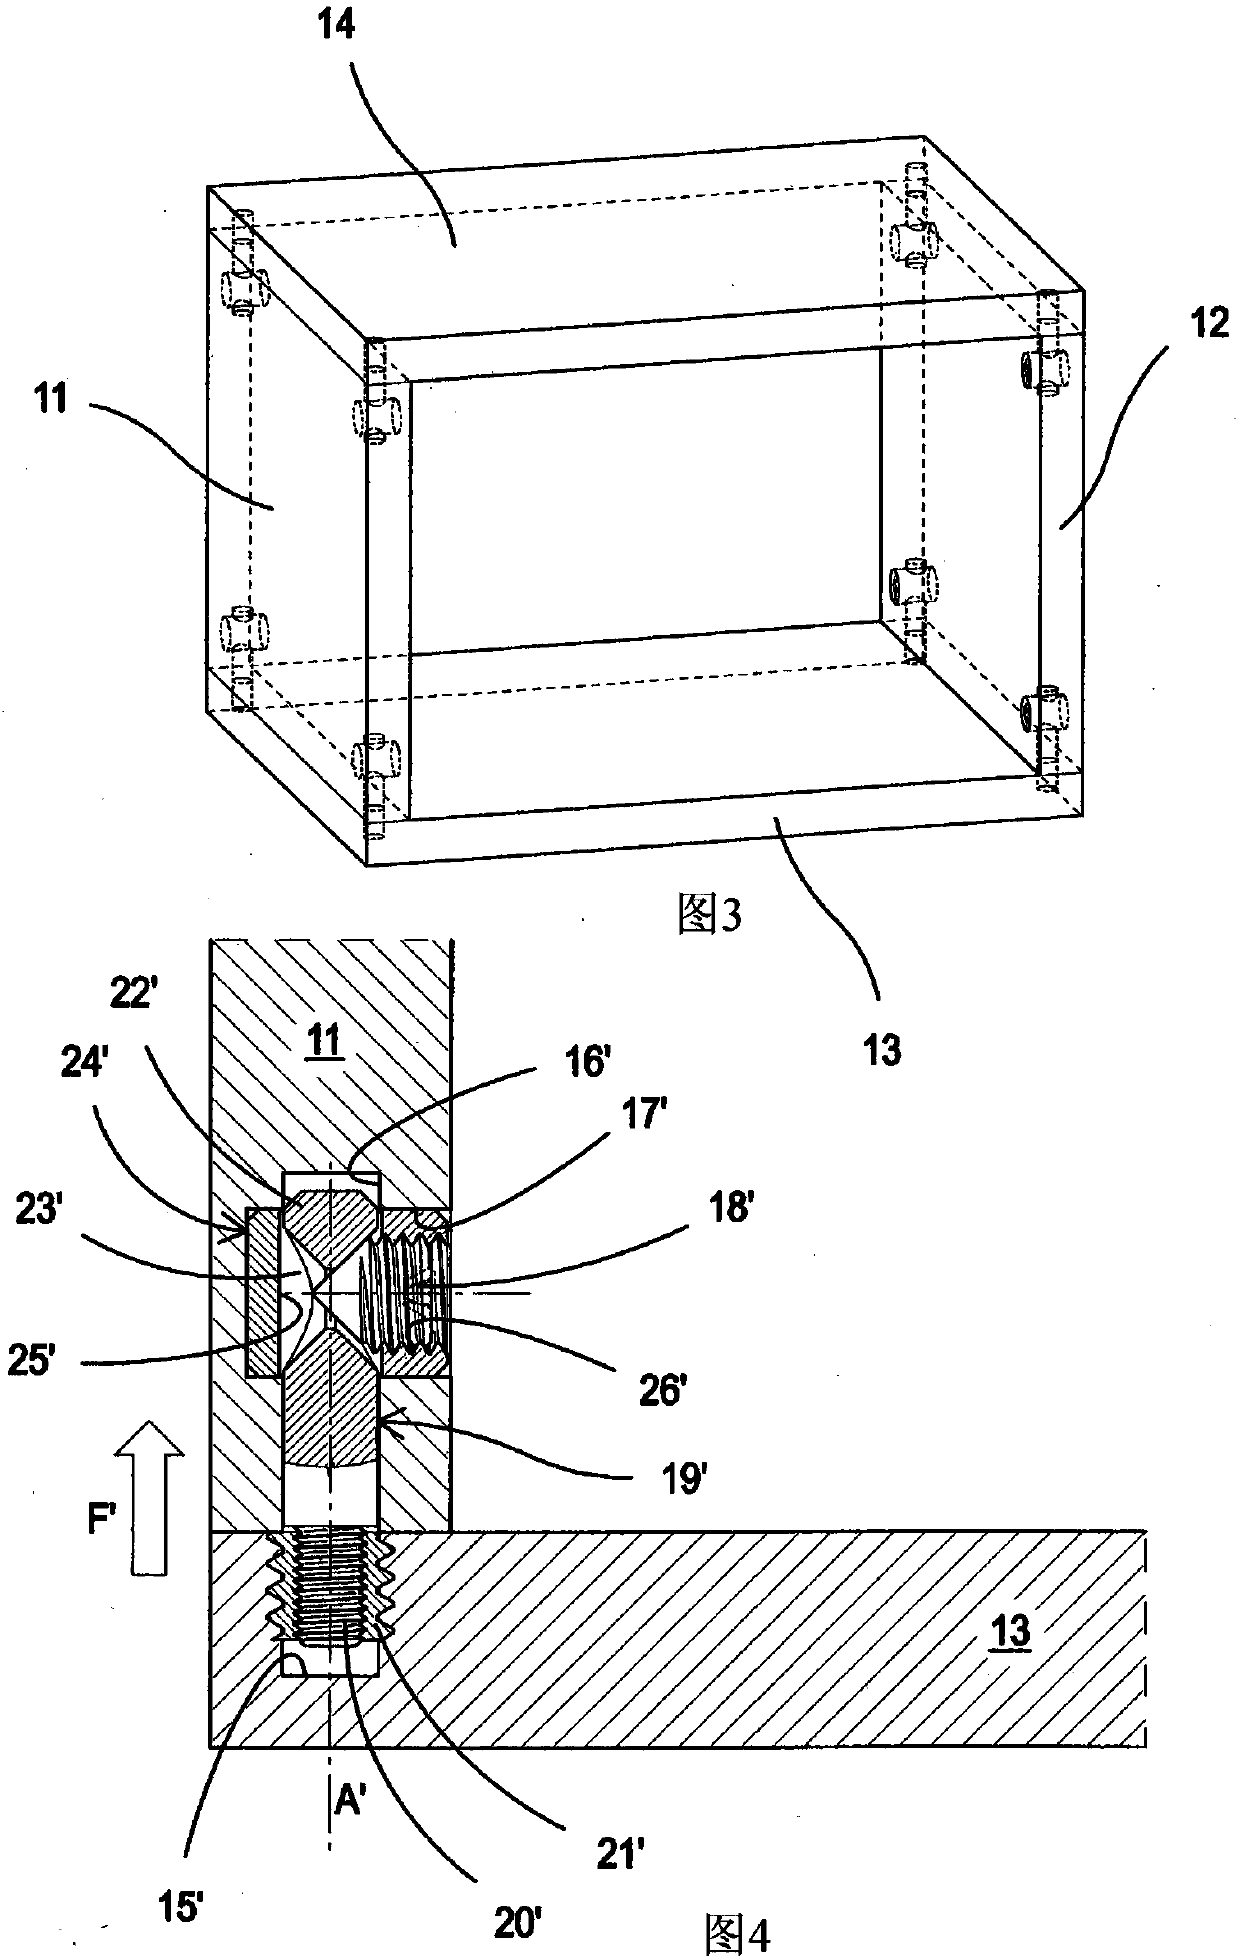 Hidden joining device for parts of furniture and furnishing items